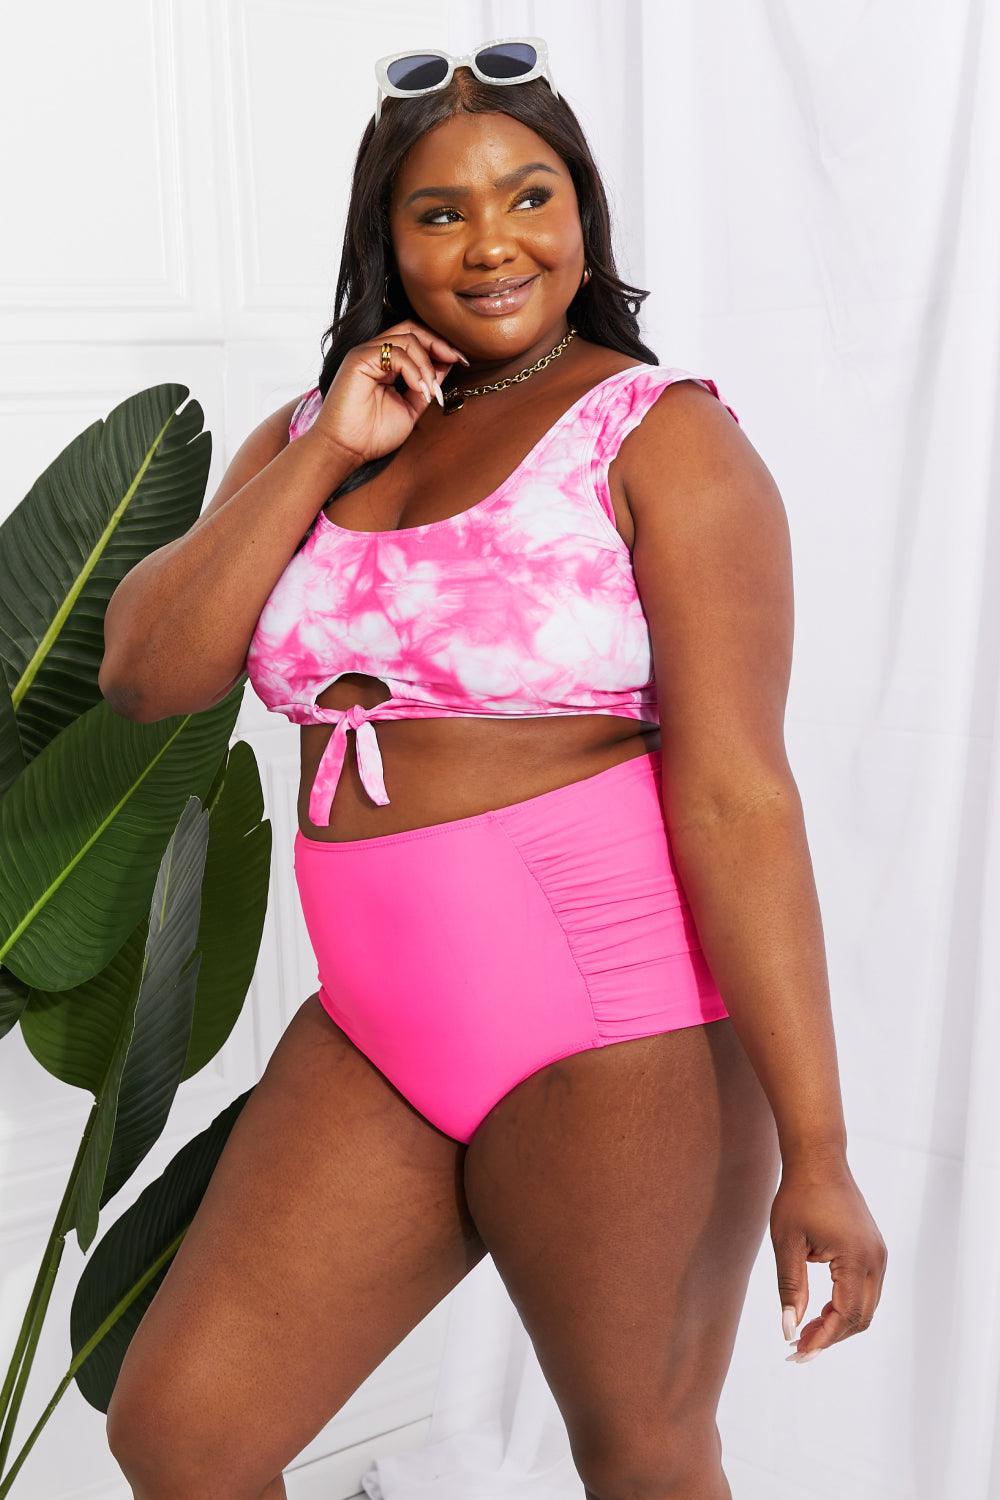 Marina West Swim Sanibel Crop Swim Top and Ruched Bottoms Set in Pink - Glamorous Boutique USA L.L.C.